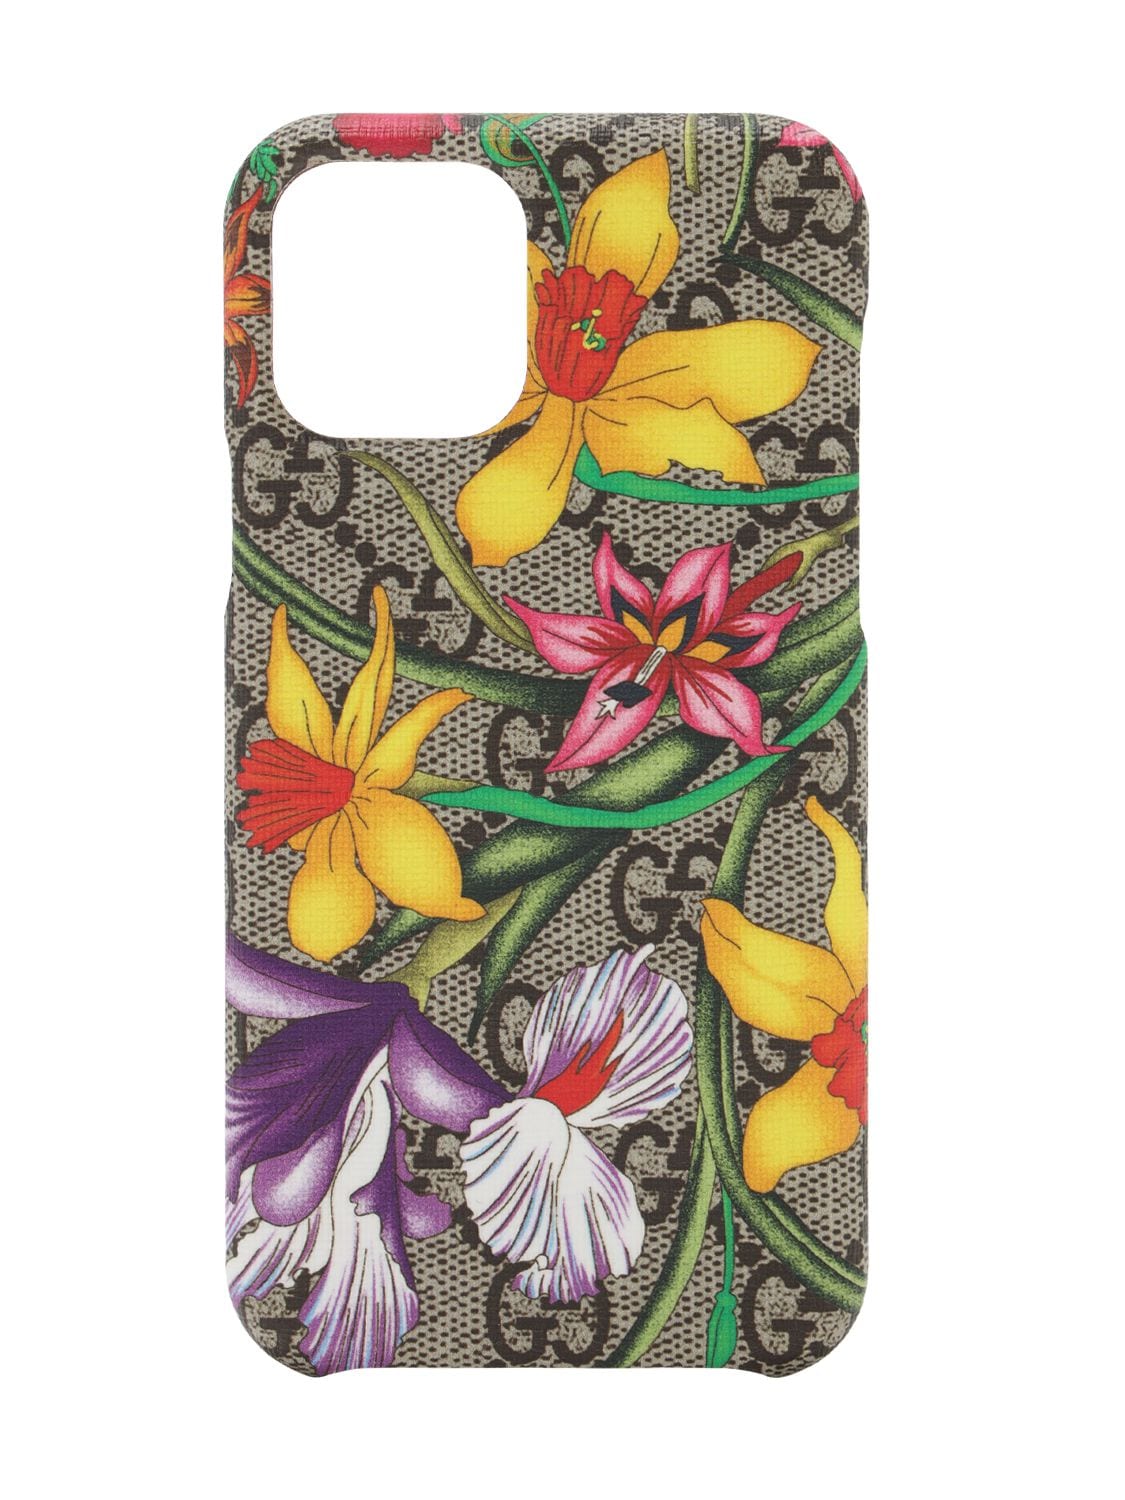 GUCCI GG FLORA IPHONE 11 PRO COVER,72IIJS024-ODQ2MG2